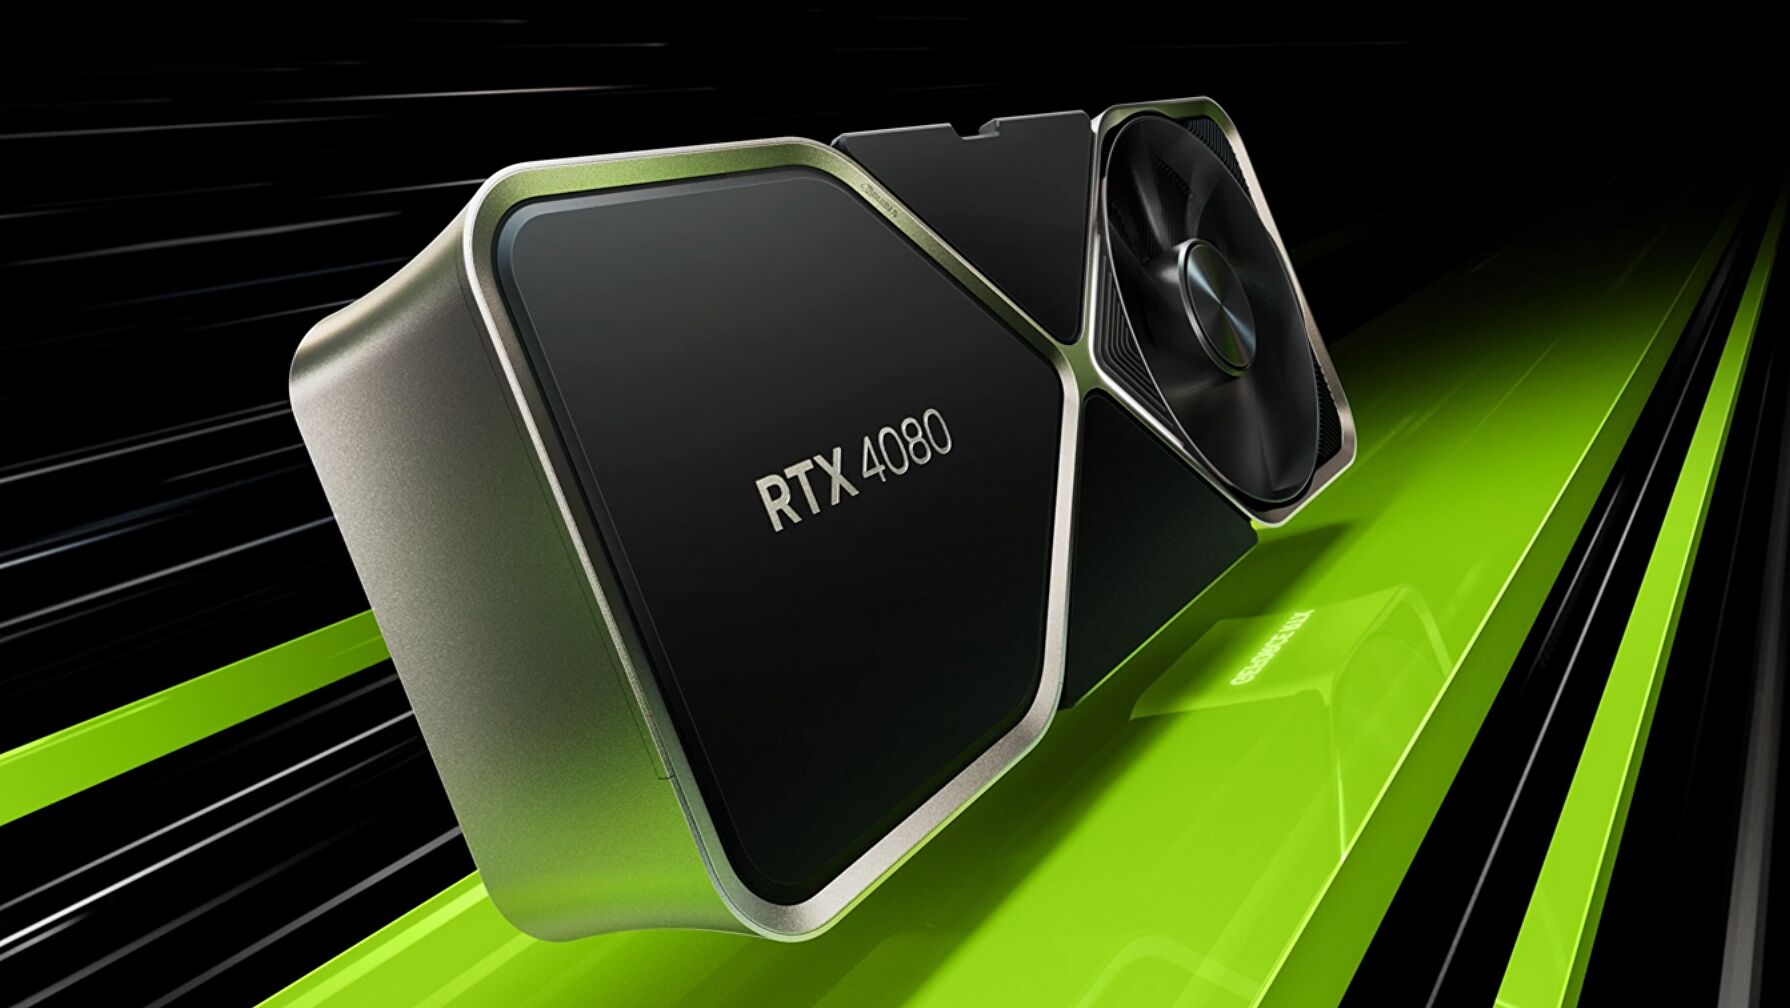 Nvidia GeForce RTX 40 series: prices, specs, release dates and more for the RTX 4080 and RTX 4090